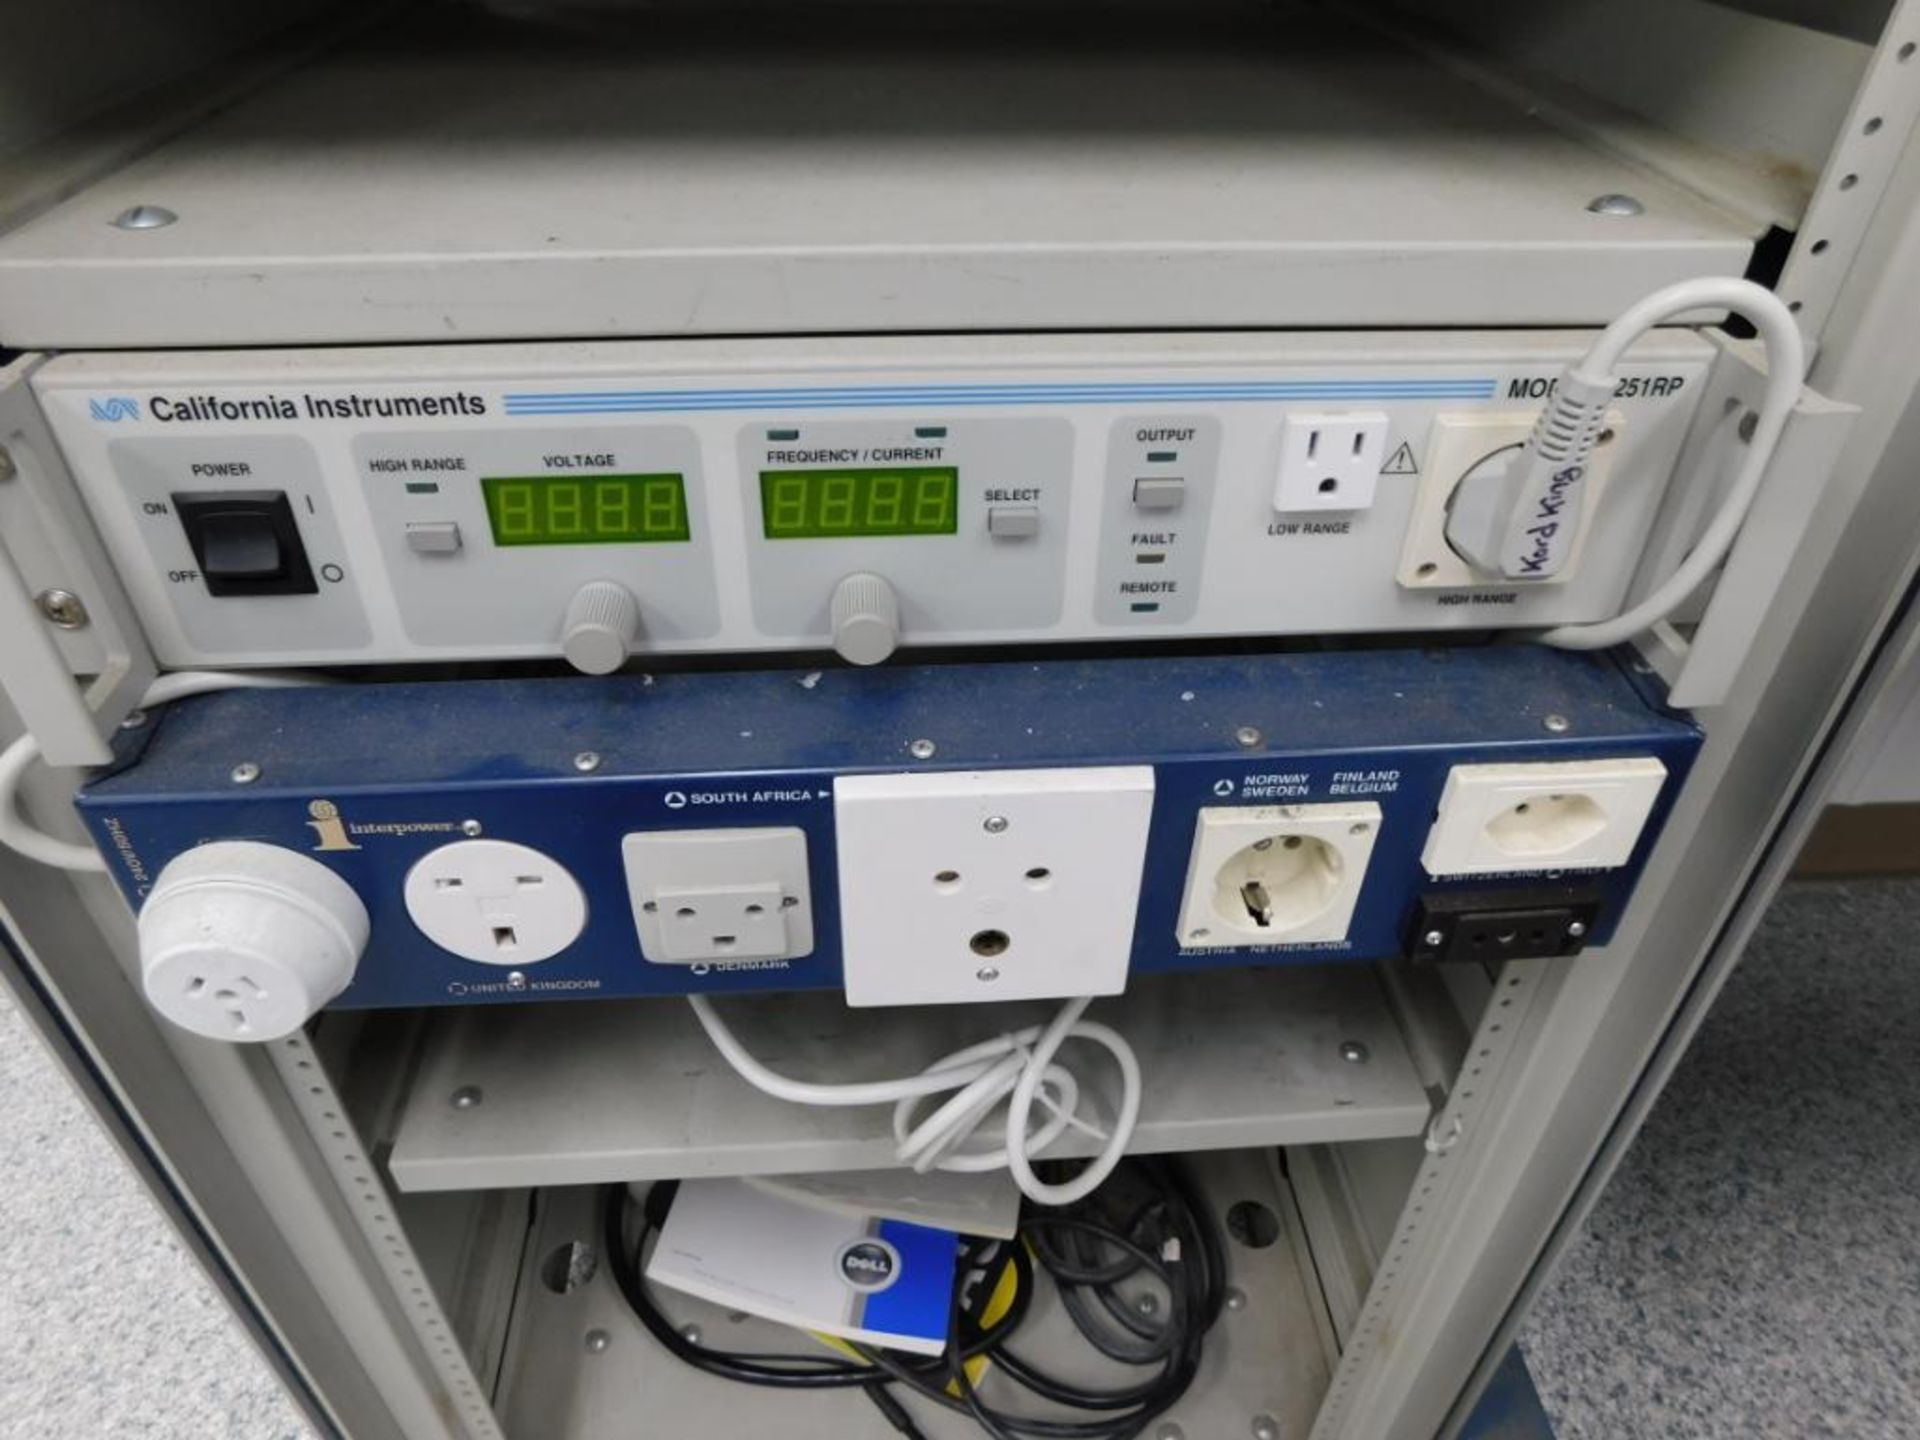 Luxtec Power Source Test Fixture Model LX1380, with California Instruments 1251RP Voltage & - Image 3 of 3